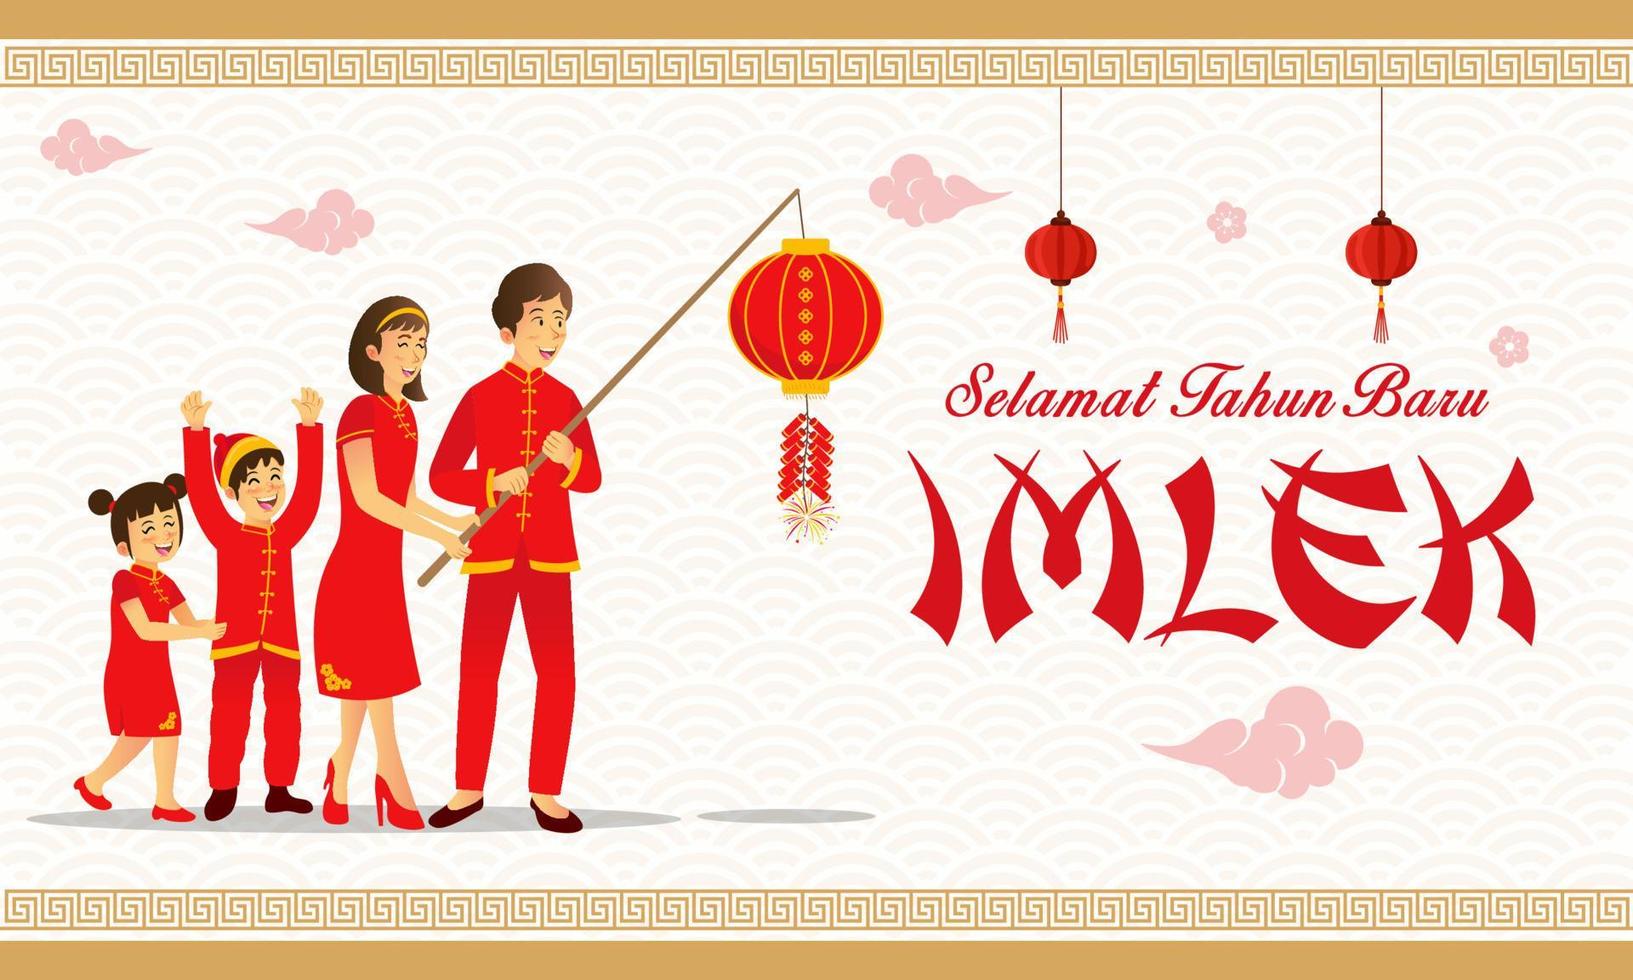 Selamat tahun baru imlek is another language of Happy chinese new year in Indonesian. Vector illustration an chinese family playing firecracker celebrating chinese new year